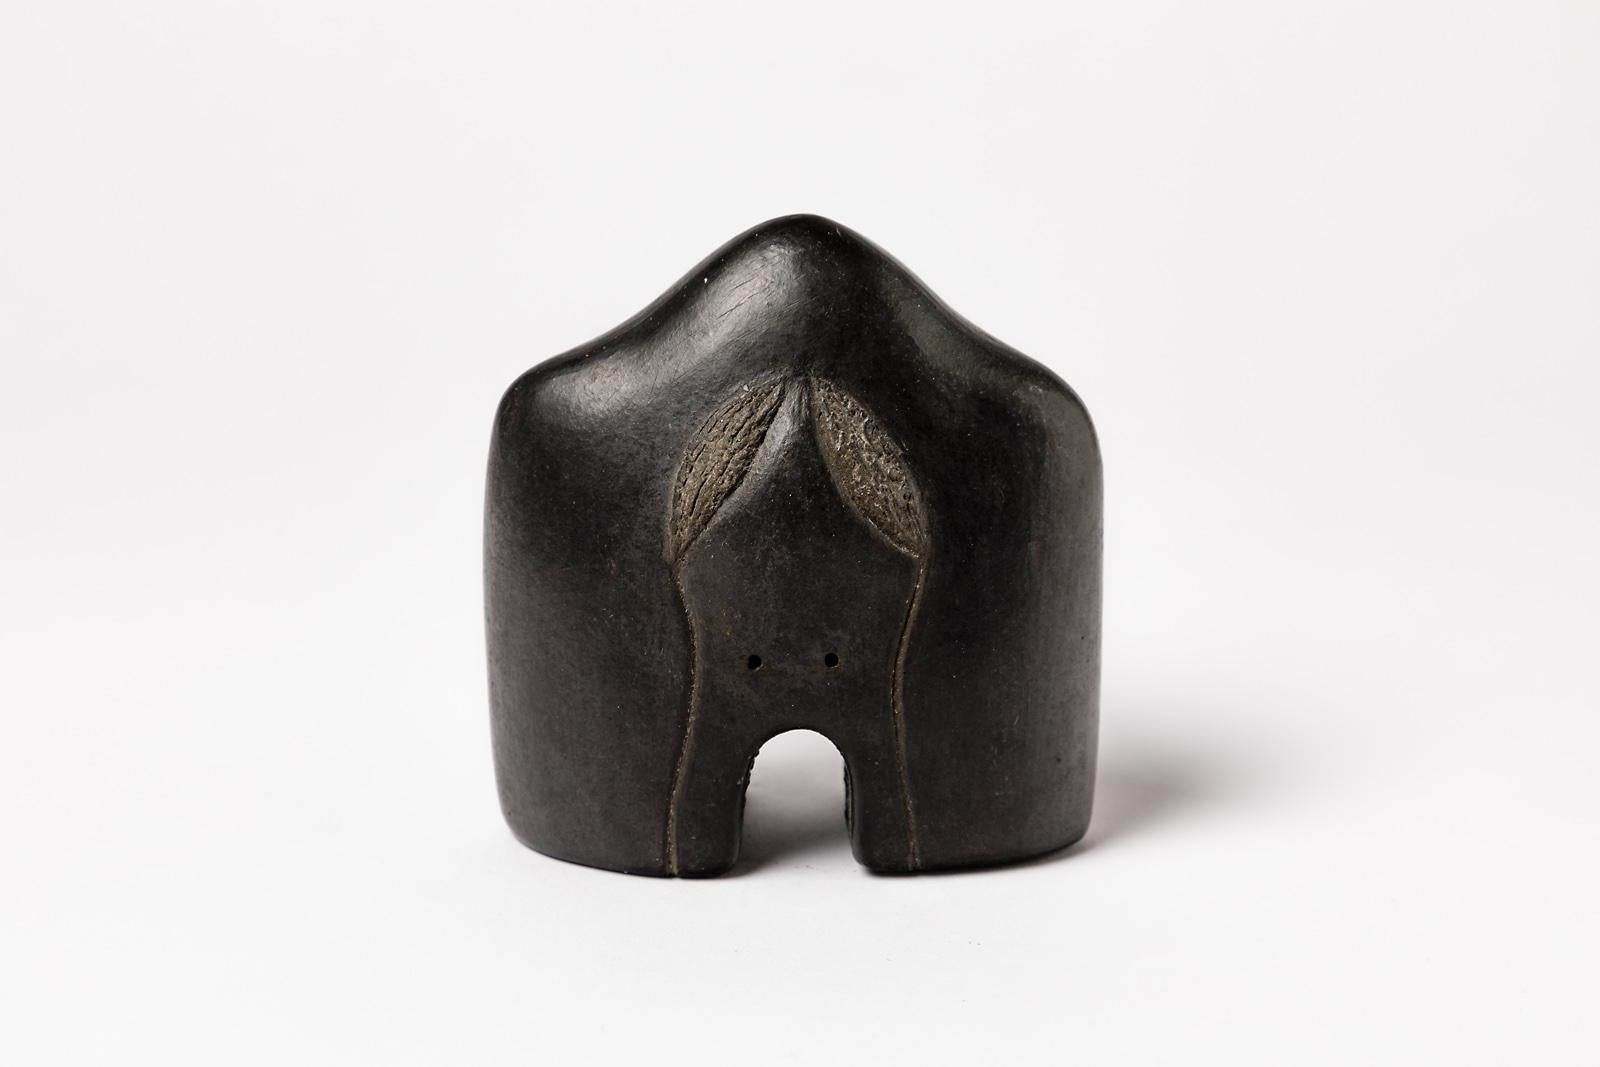 Mid-Century Modern Abstract Black Ceramic Sculpture by Marionneau French Artist, circa 1980 For Sale